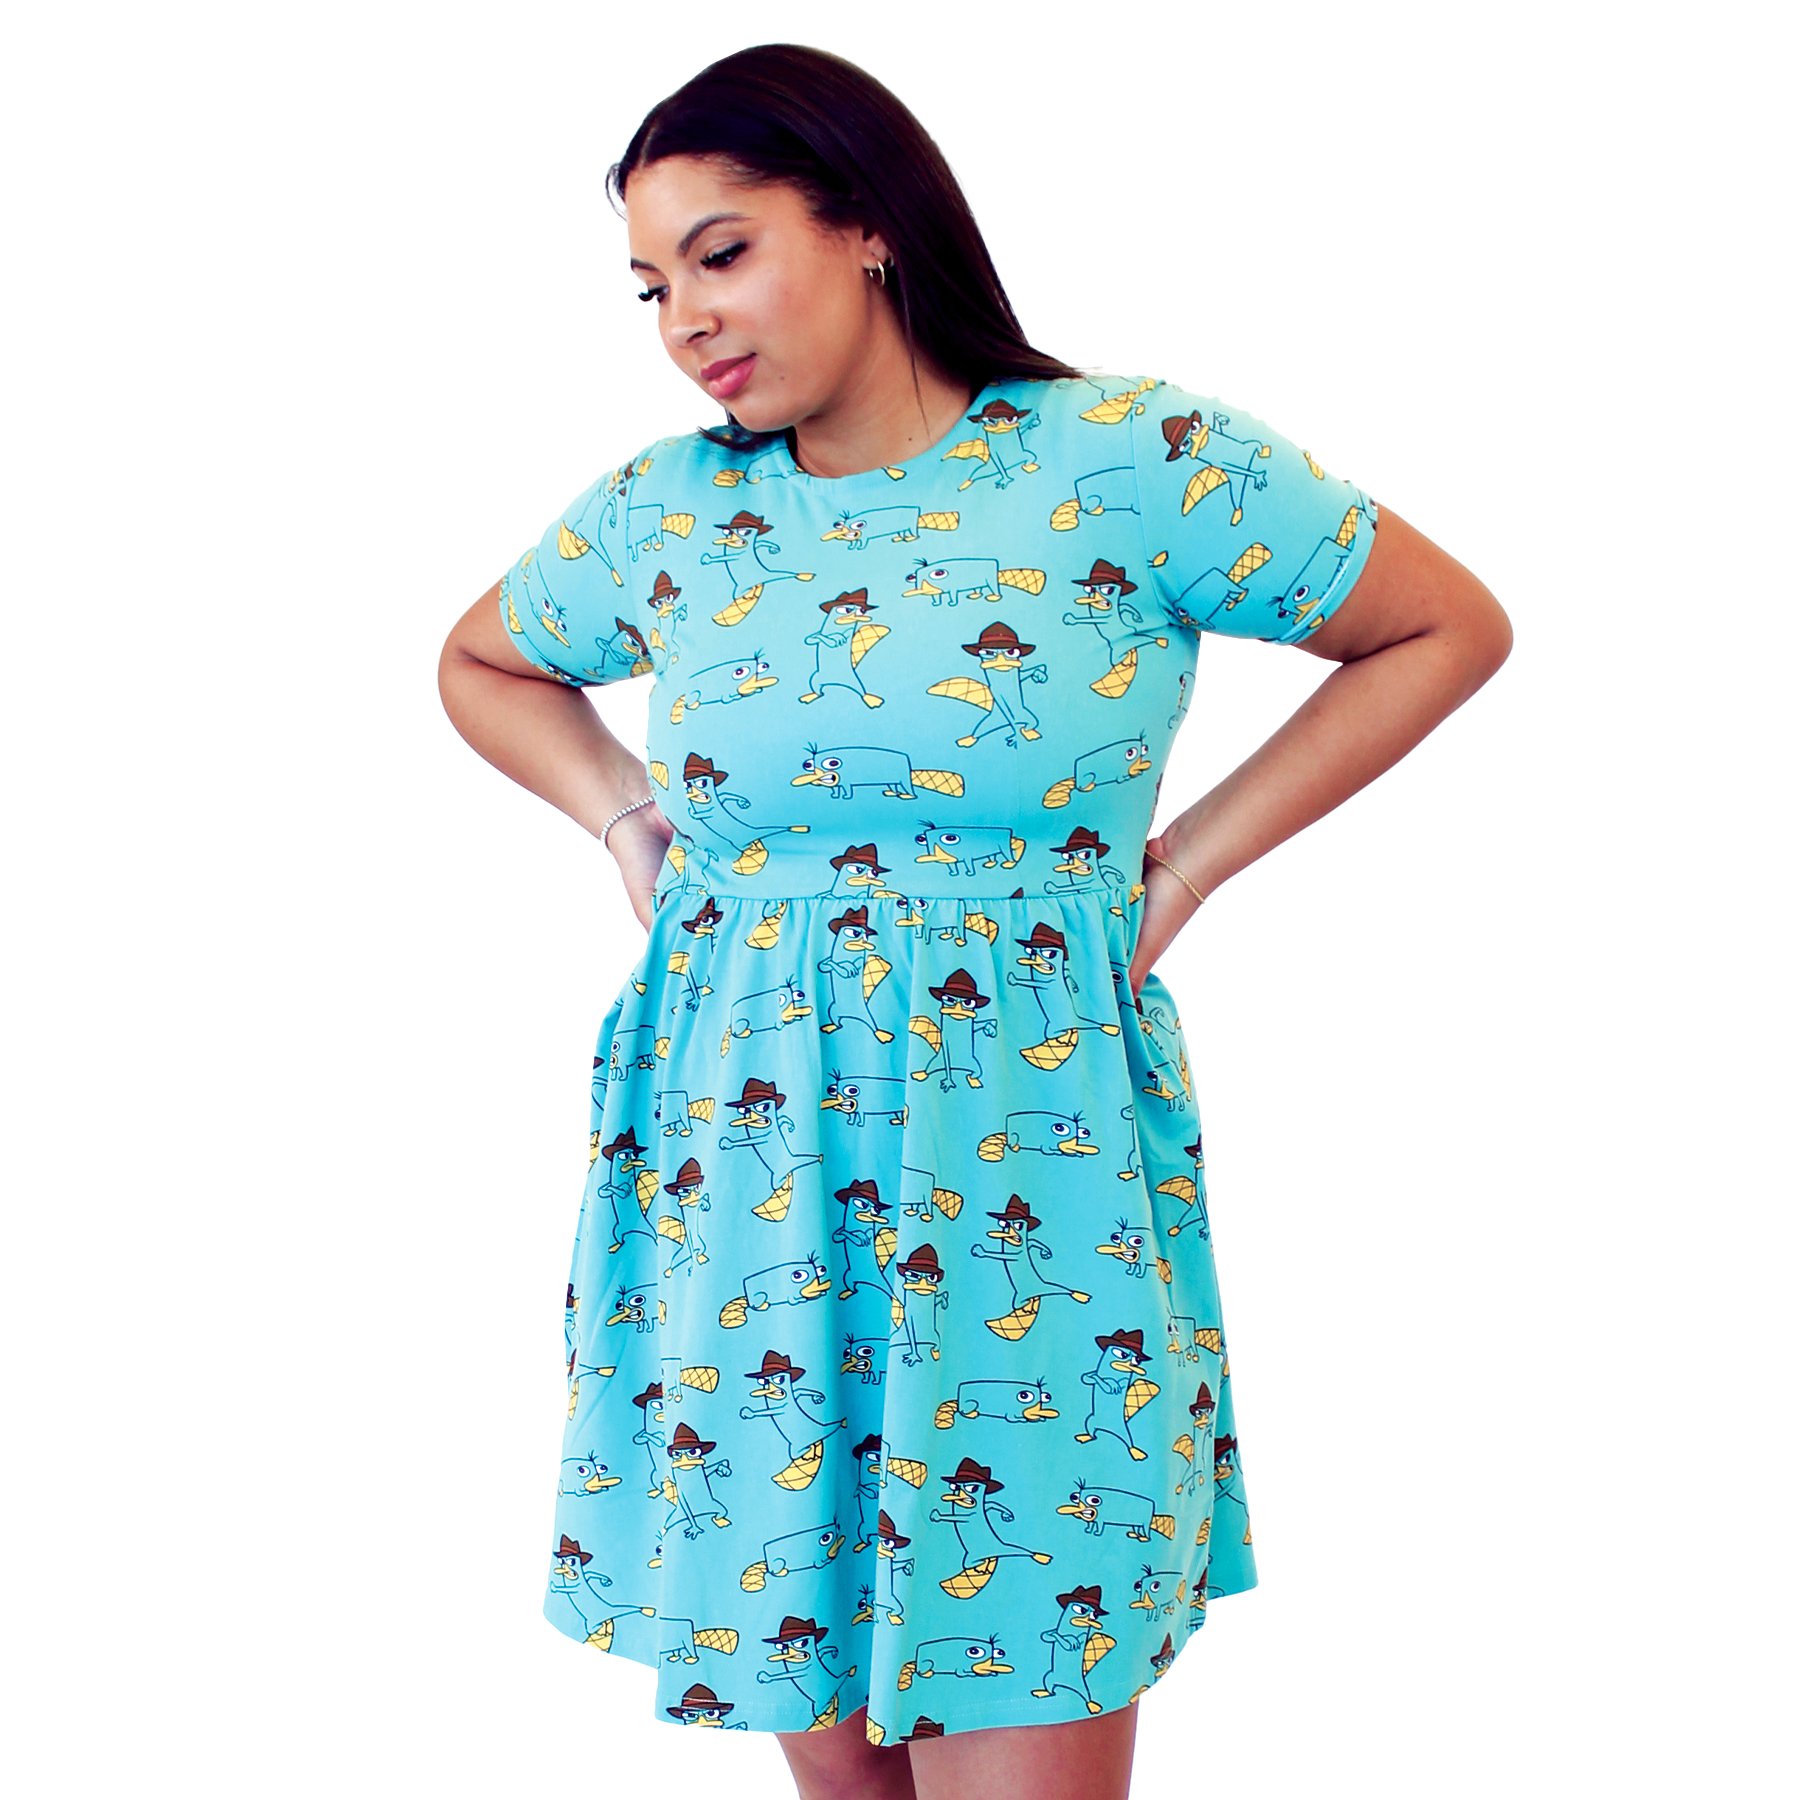 Perry the platypus dress